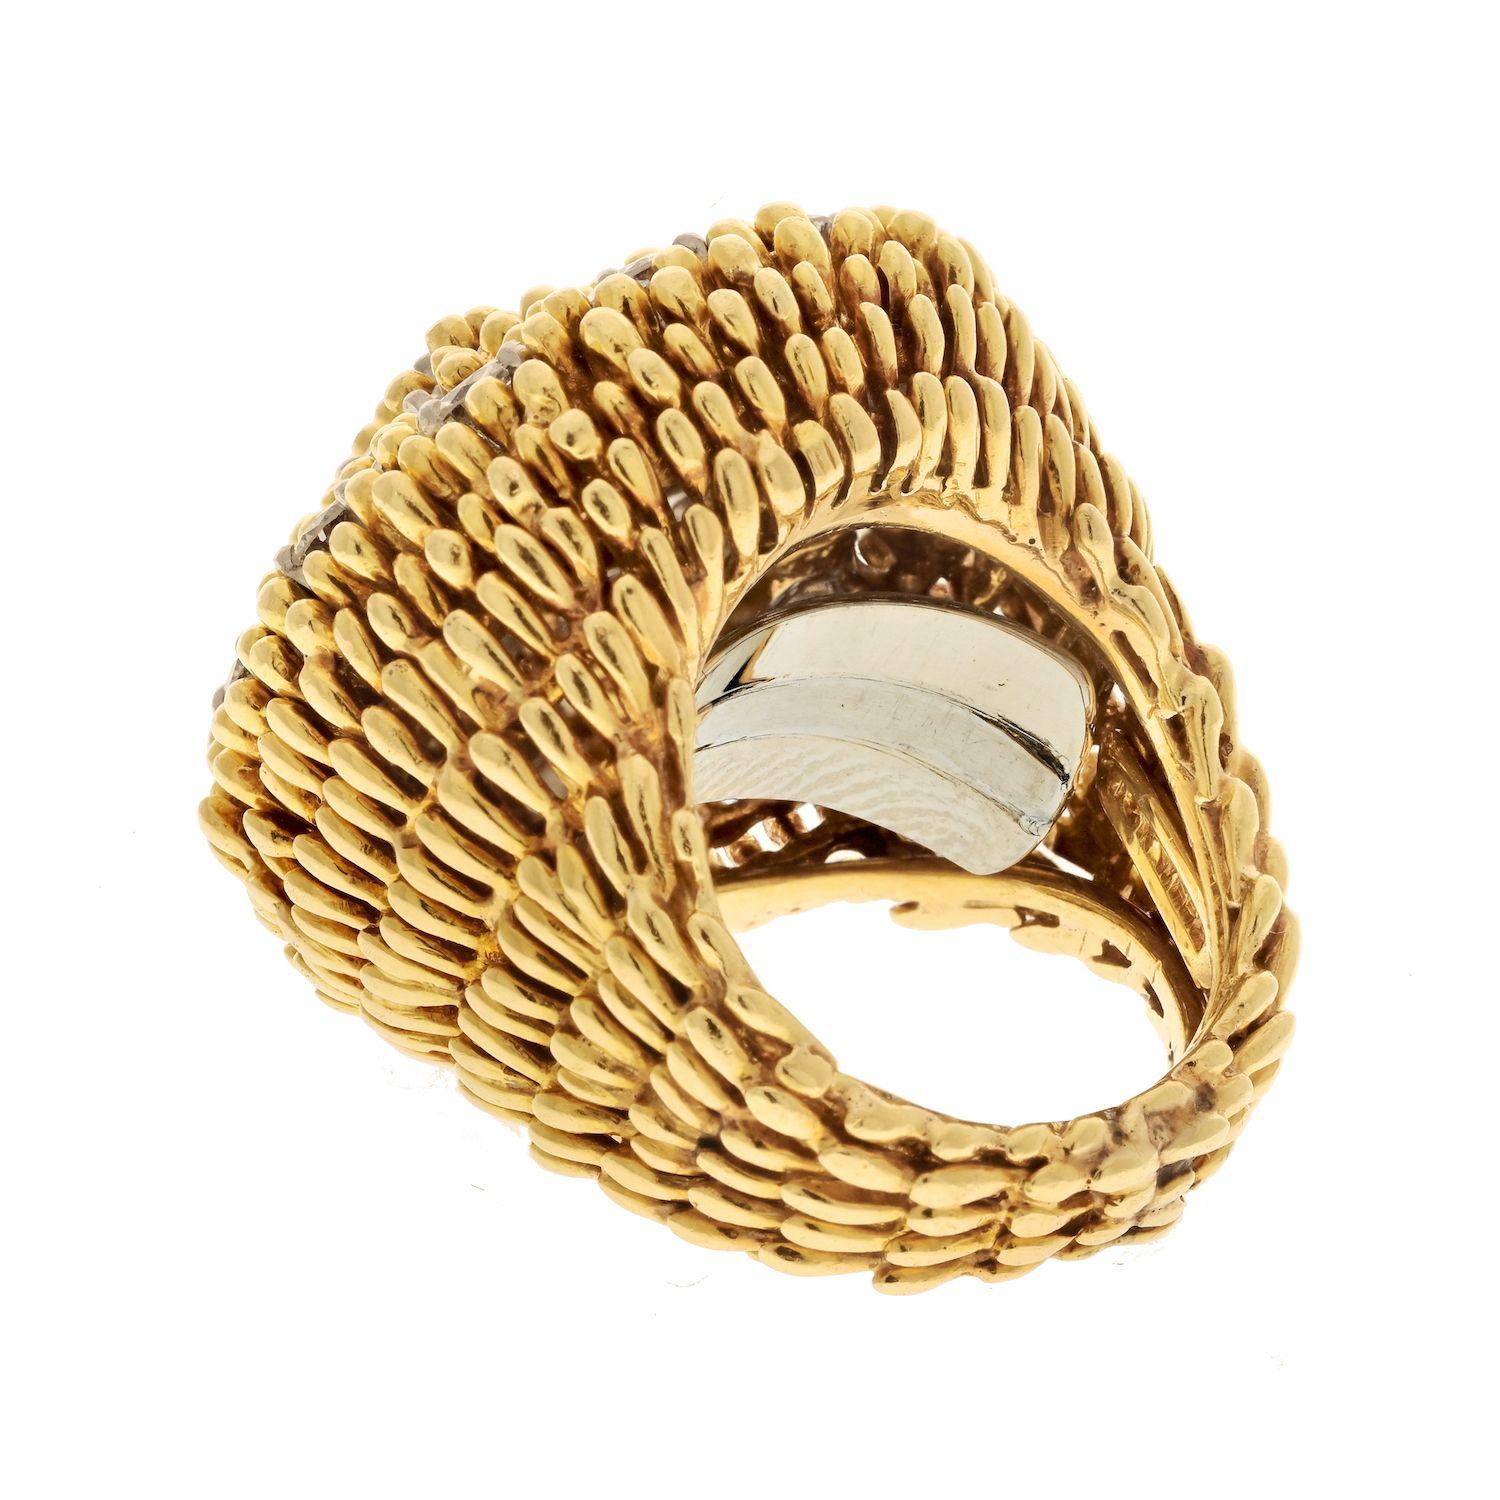 The David Webb Platinum & 18K Yellow Gold 1960s Diamond Textured Cocktail Ring is a stunning piece of jewelry that showcases the brand's iconic design and exceptional craftsmanship. This cocktail ring features a wide, spready top that is adorned